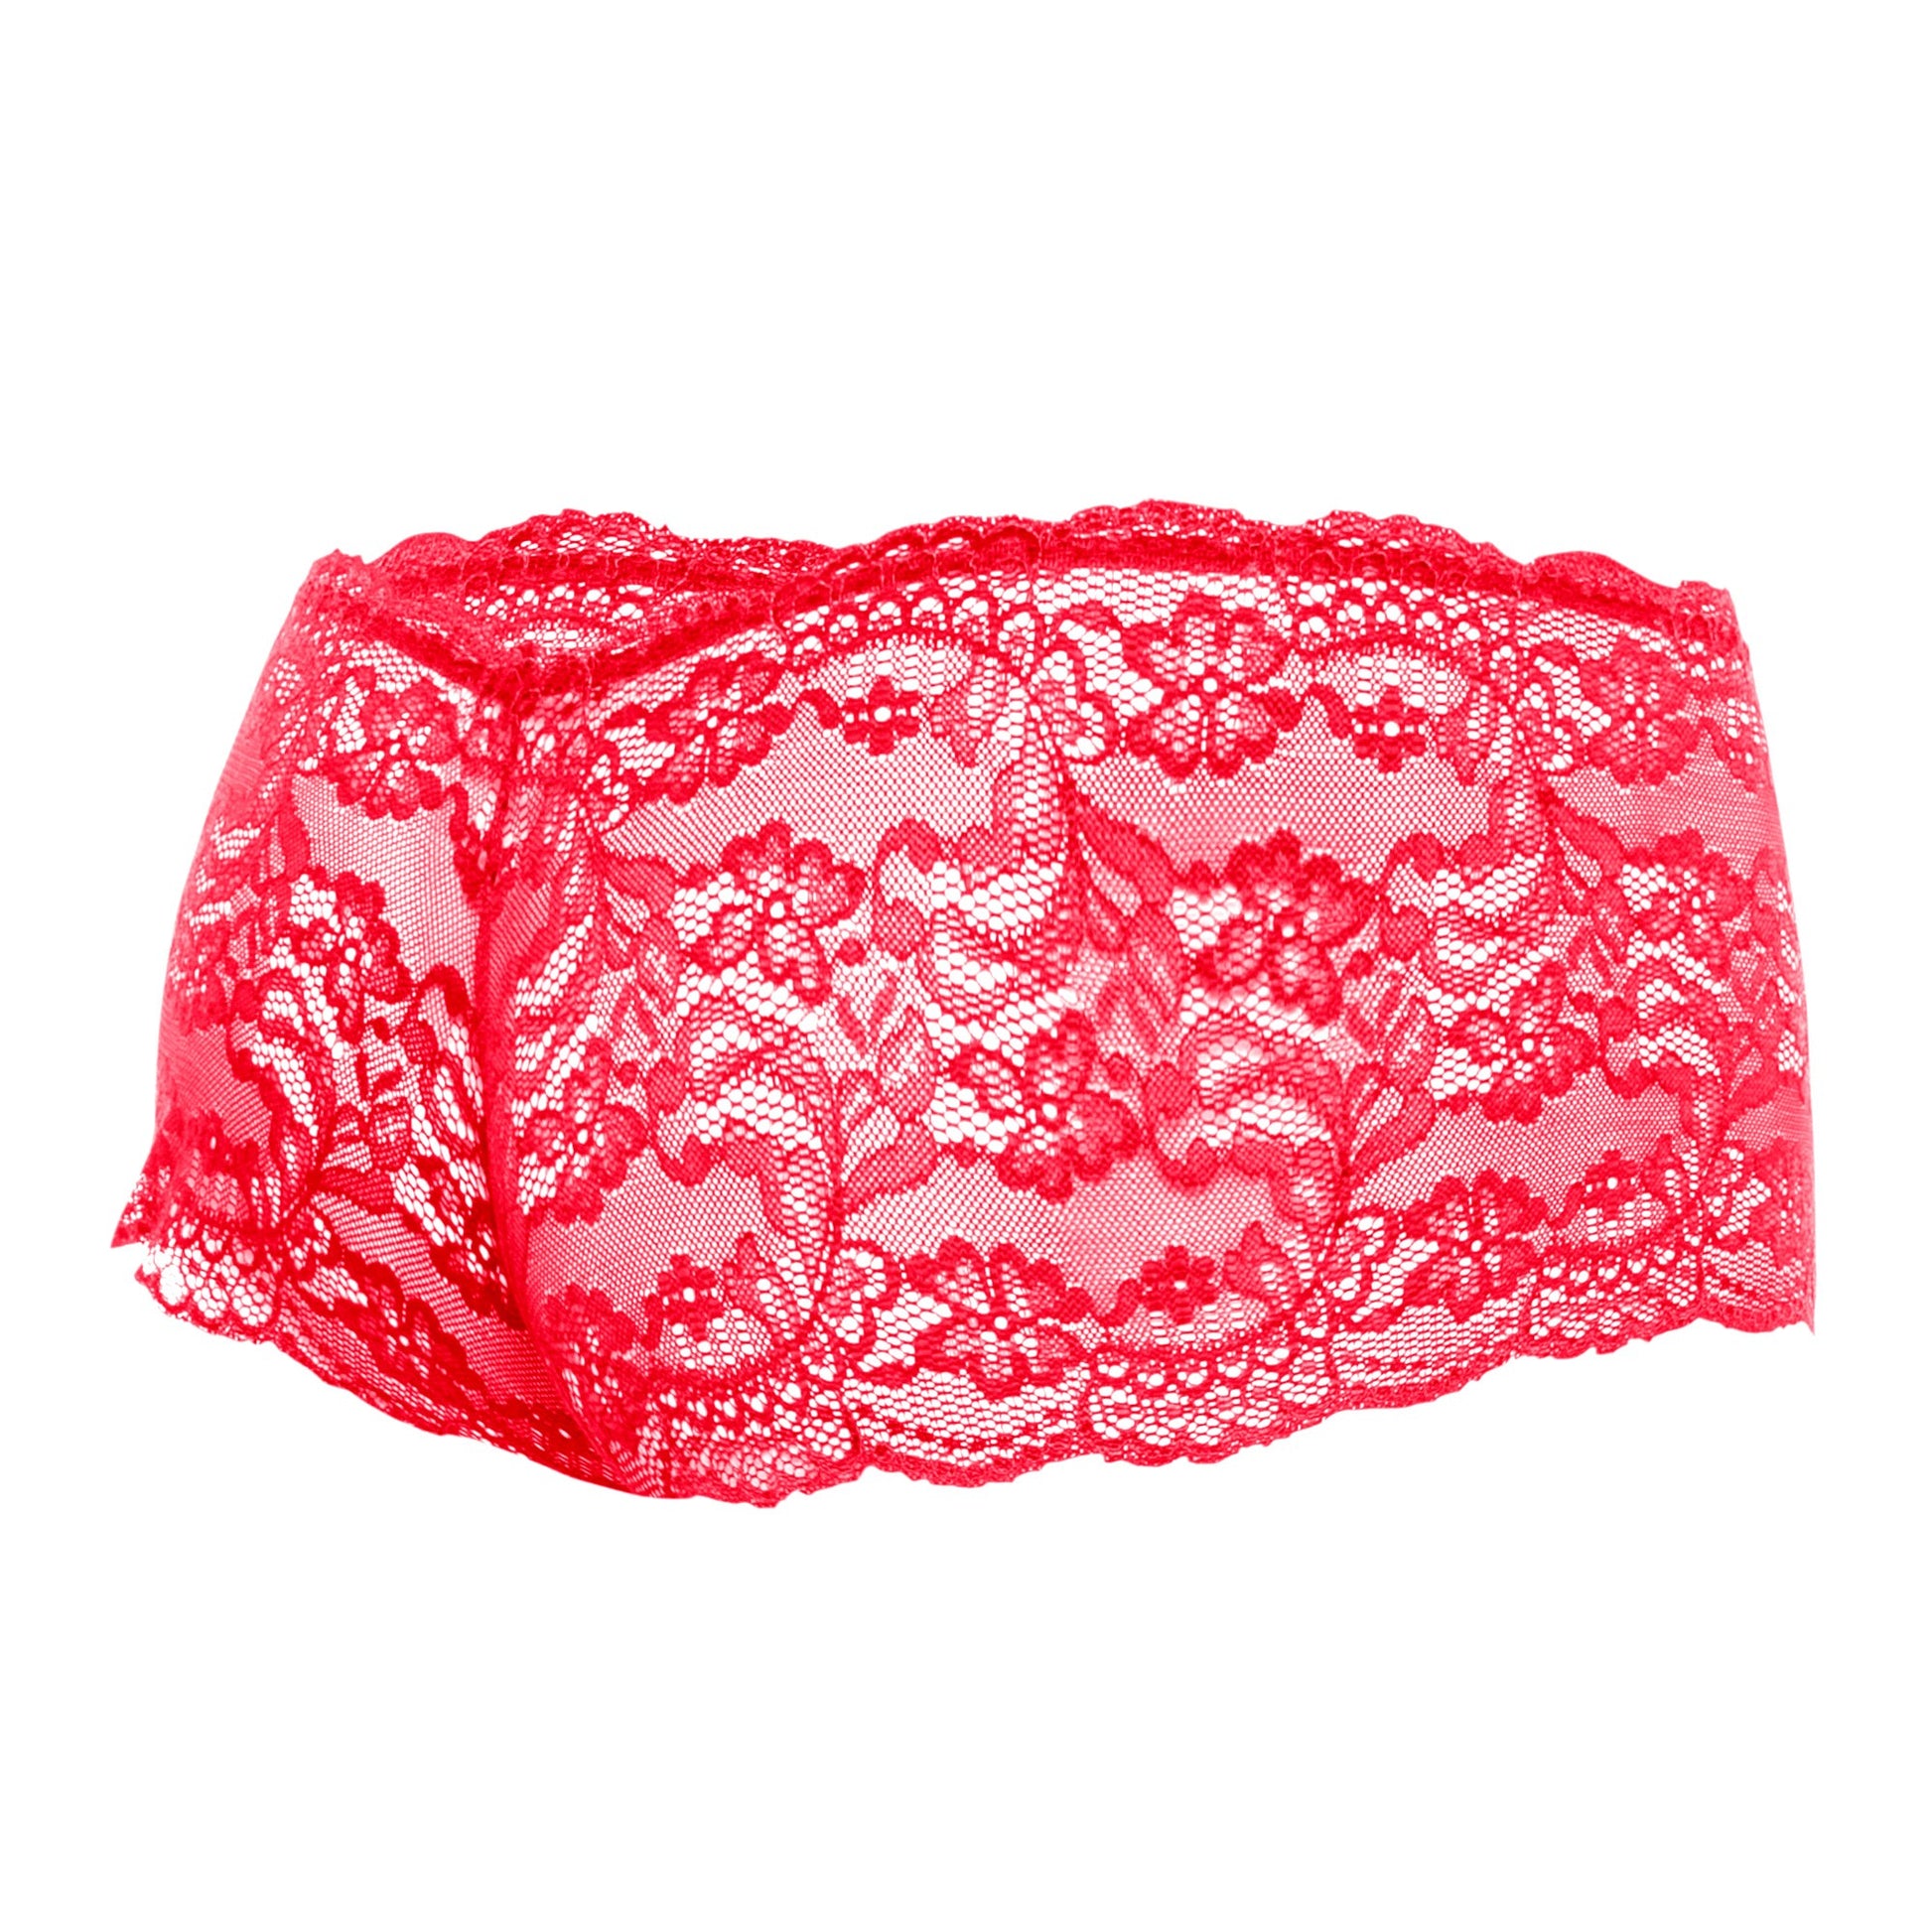 Malebasics Lace Boxer Boy Shorts in Red - Back View